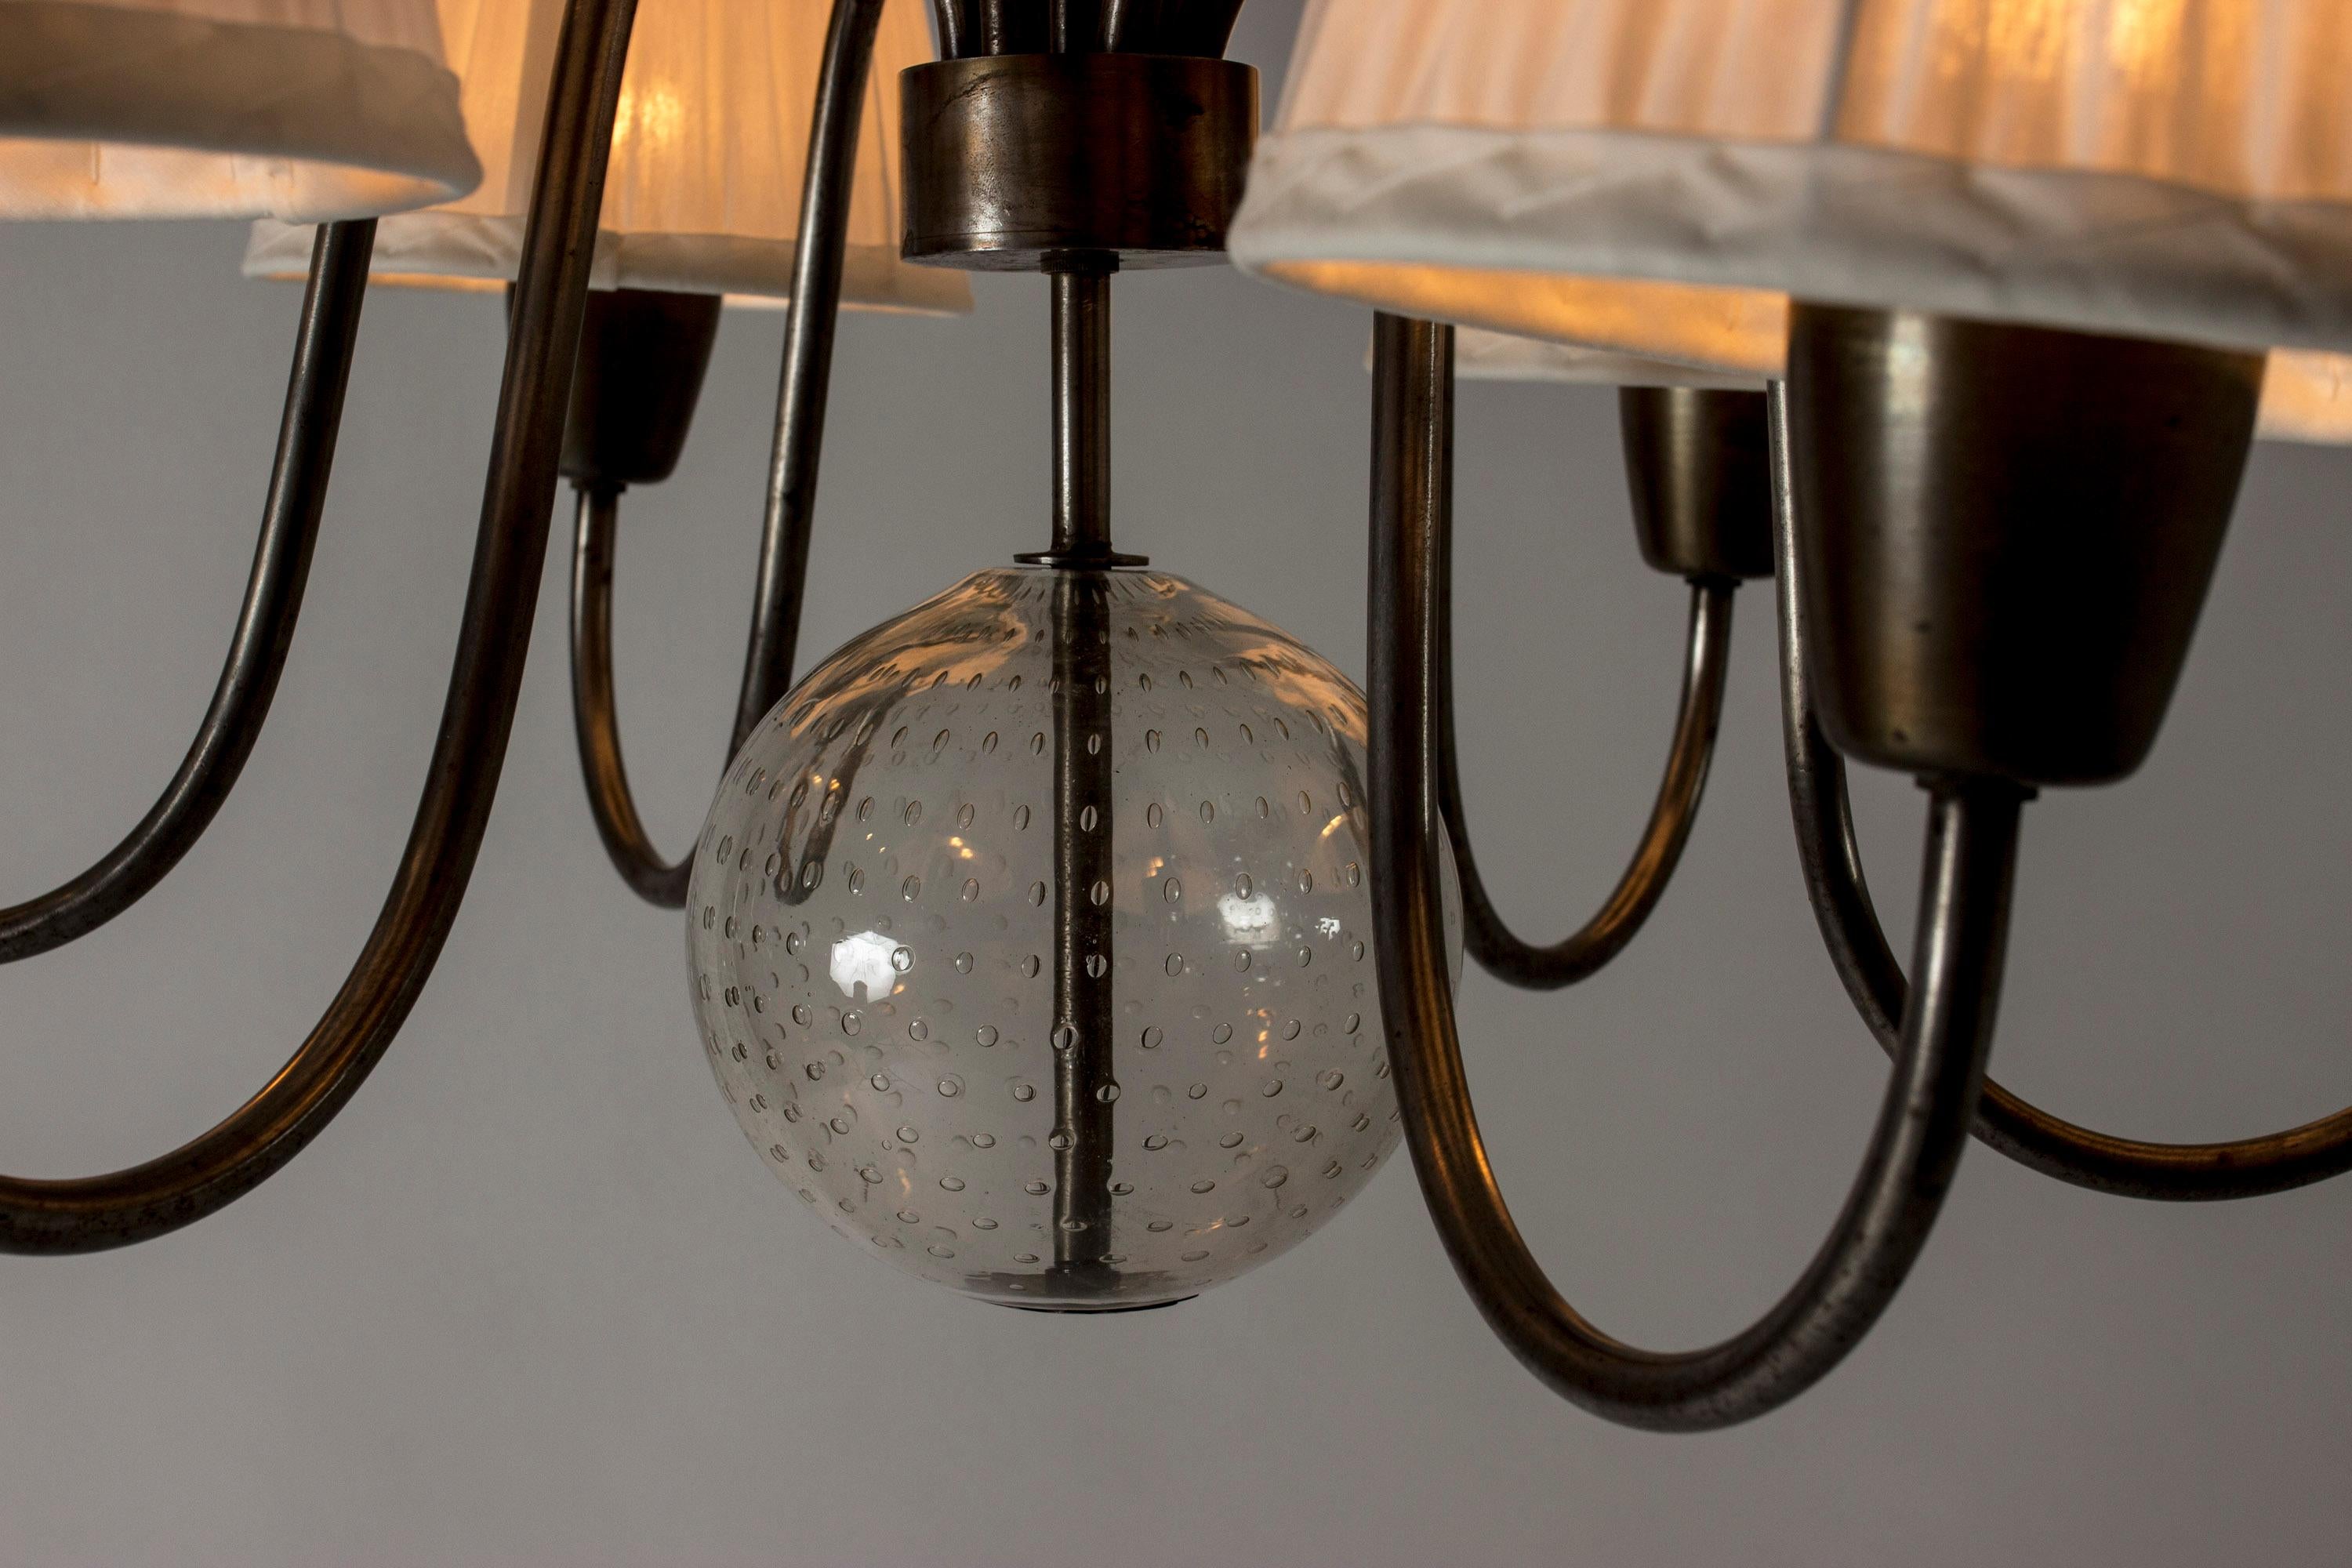 Beautiful chandelier by Hans Bergström, with six curved arms coming out from the center. Glass sphere with air bubbles makes a very decorative, floating element in the middle. Pleated white shades, chain suspension.

Hans Bergström was the owner